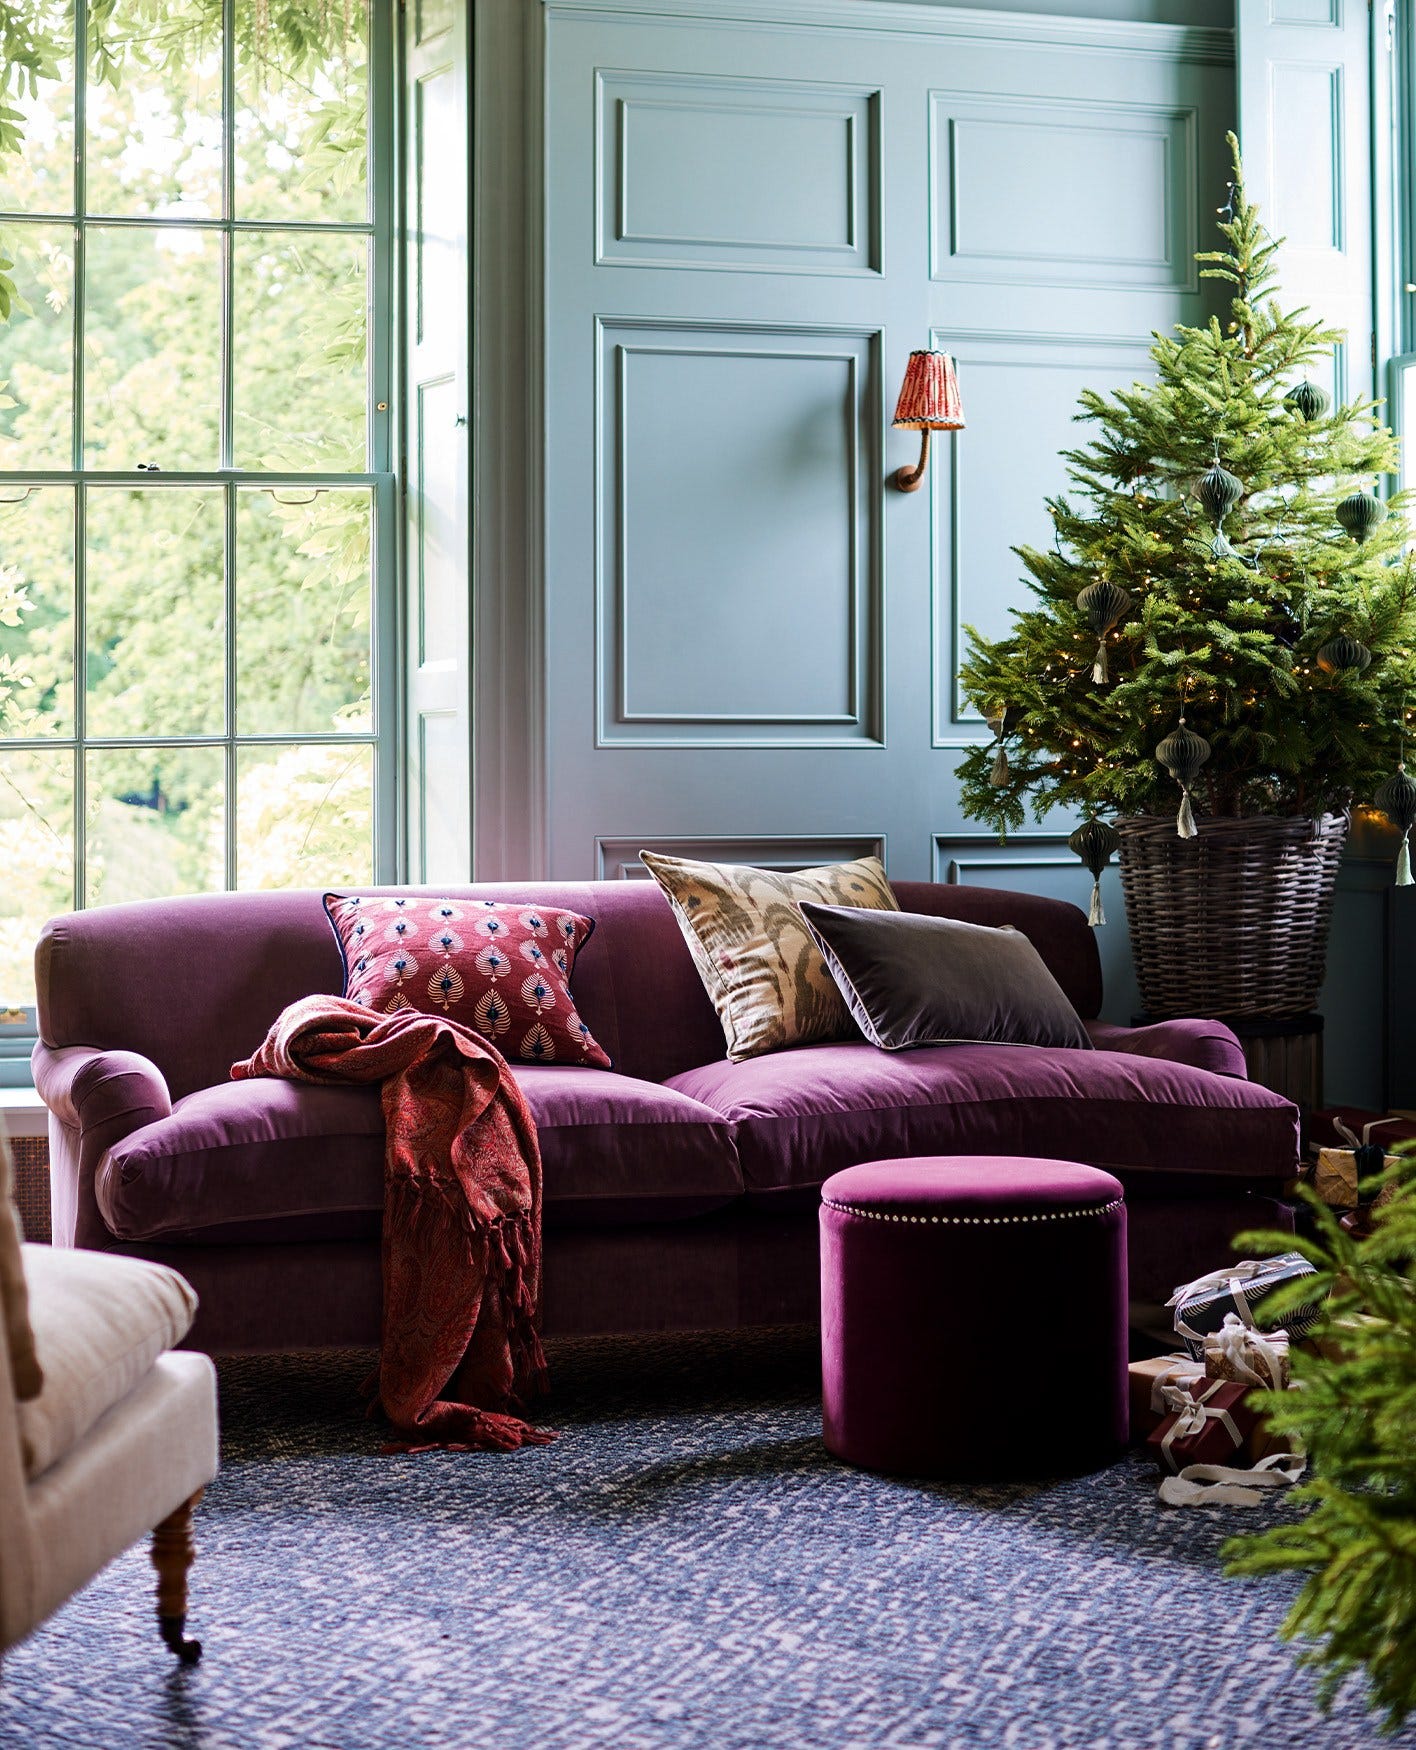 A bright magenta velvet sofa sits in a blue-walled room. A Christmas tree is seen in the background, and the sofa is decorated with cushions.